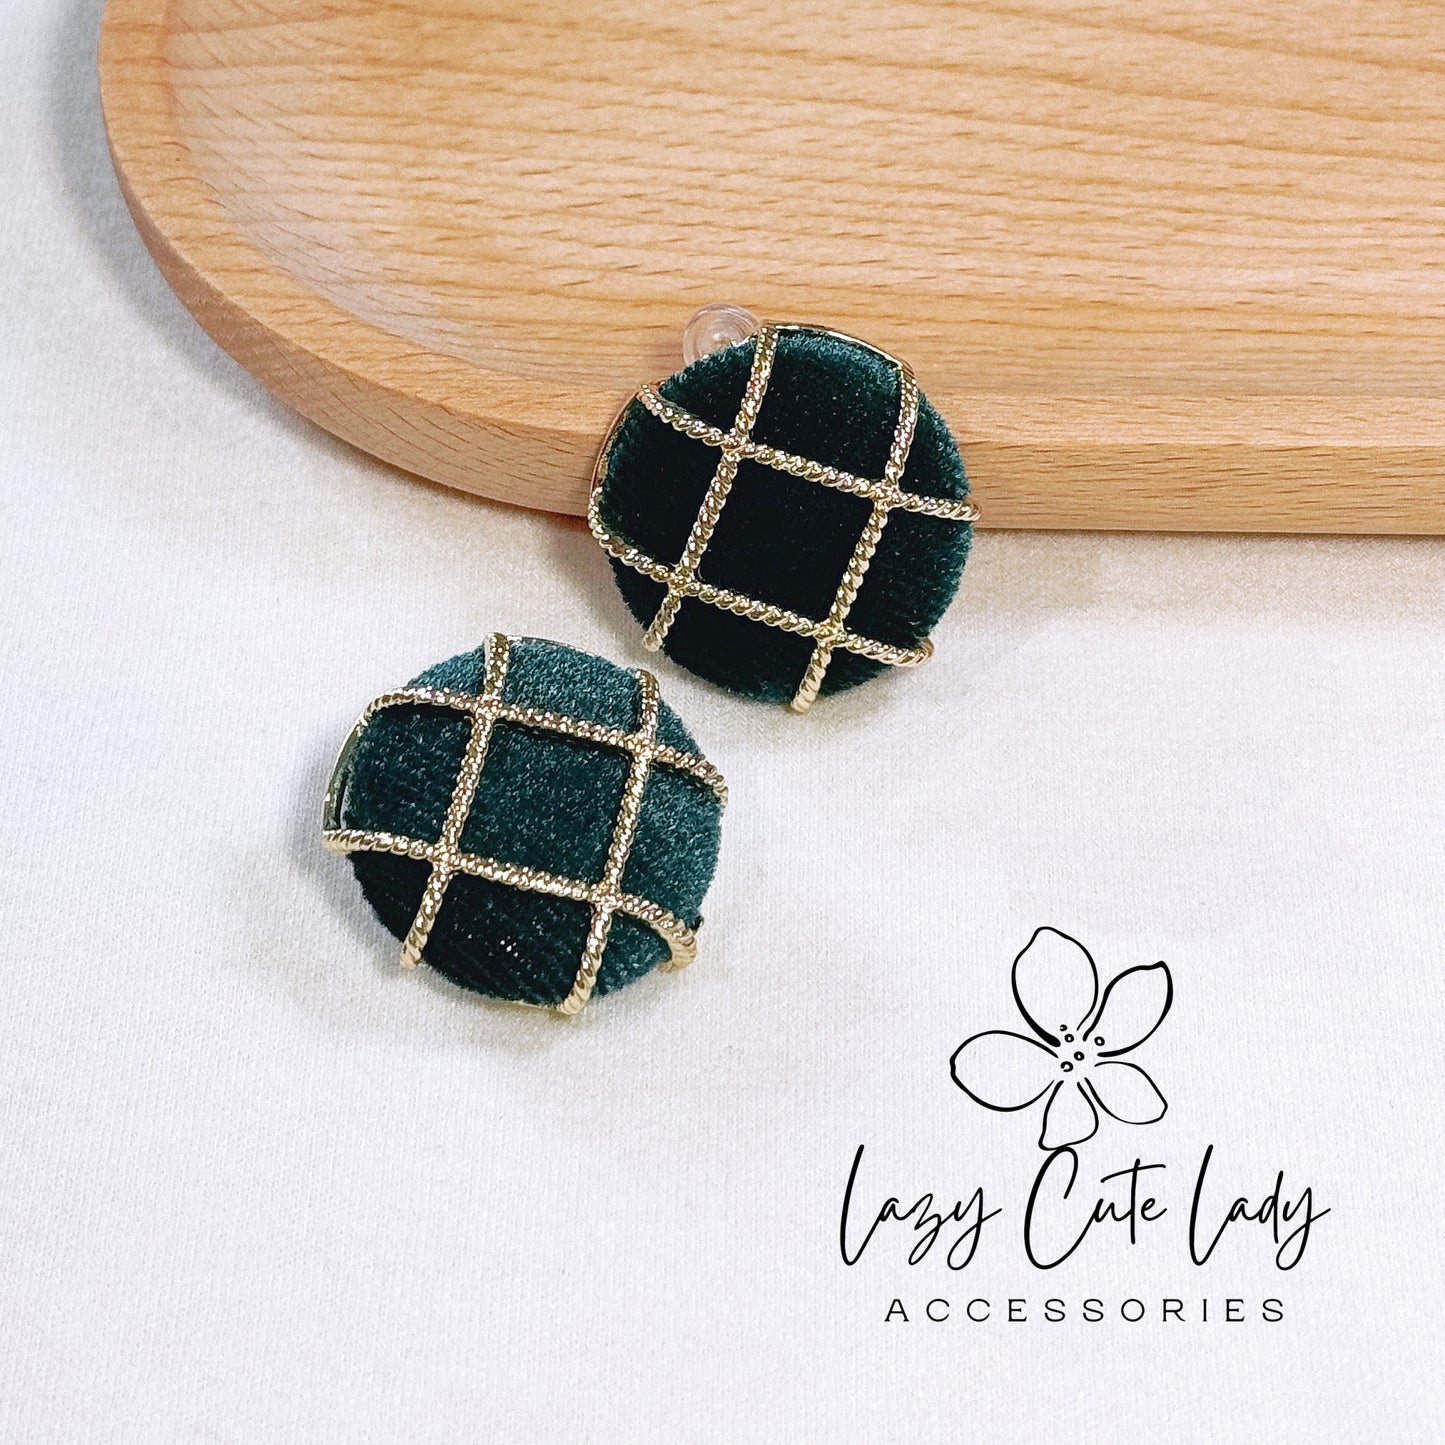 Exquisite Green Velvet Round Stud Earrings with Gold Mesh Detail